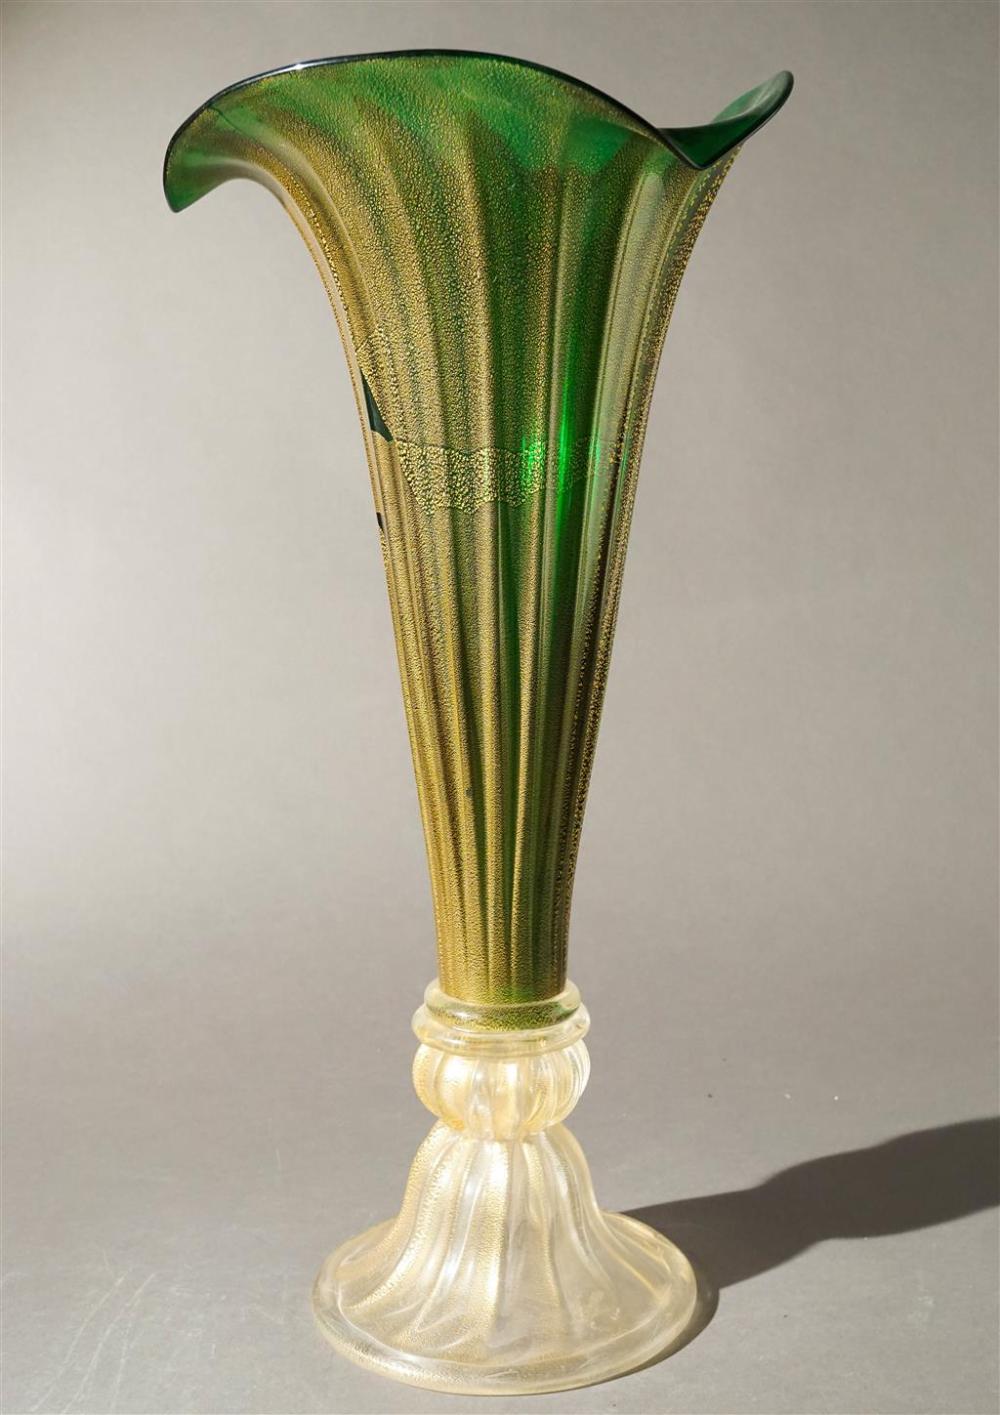 GOLD SPECKLED GREEN GLASS TRUMPET 329310